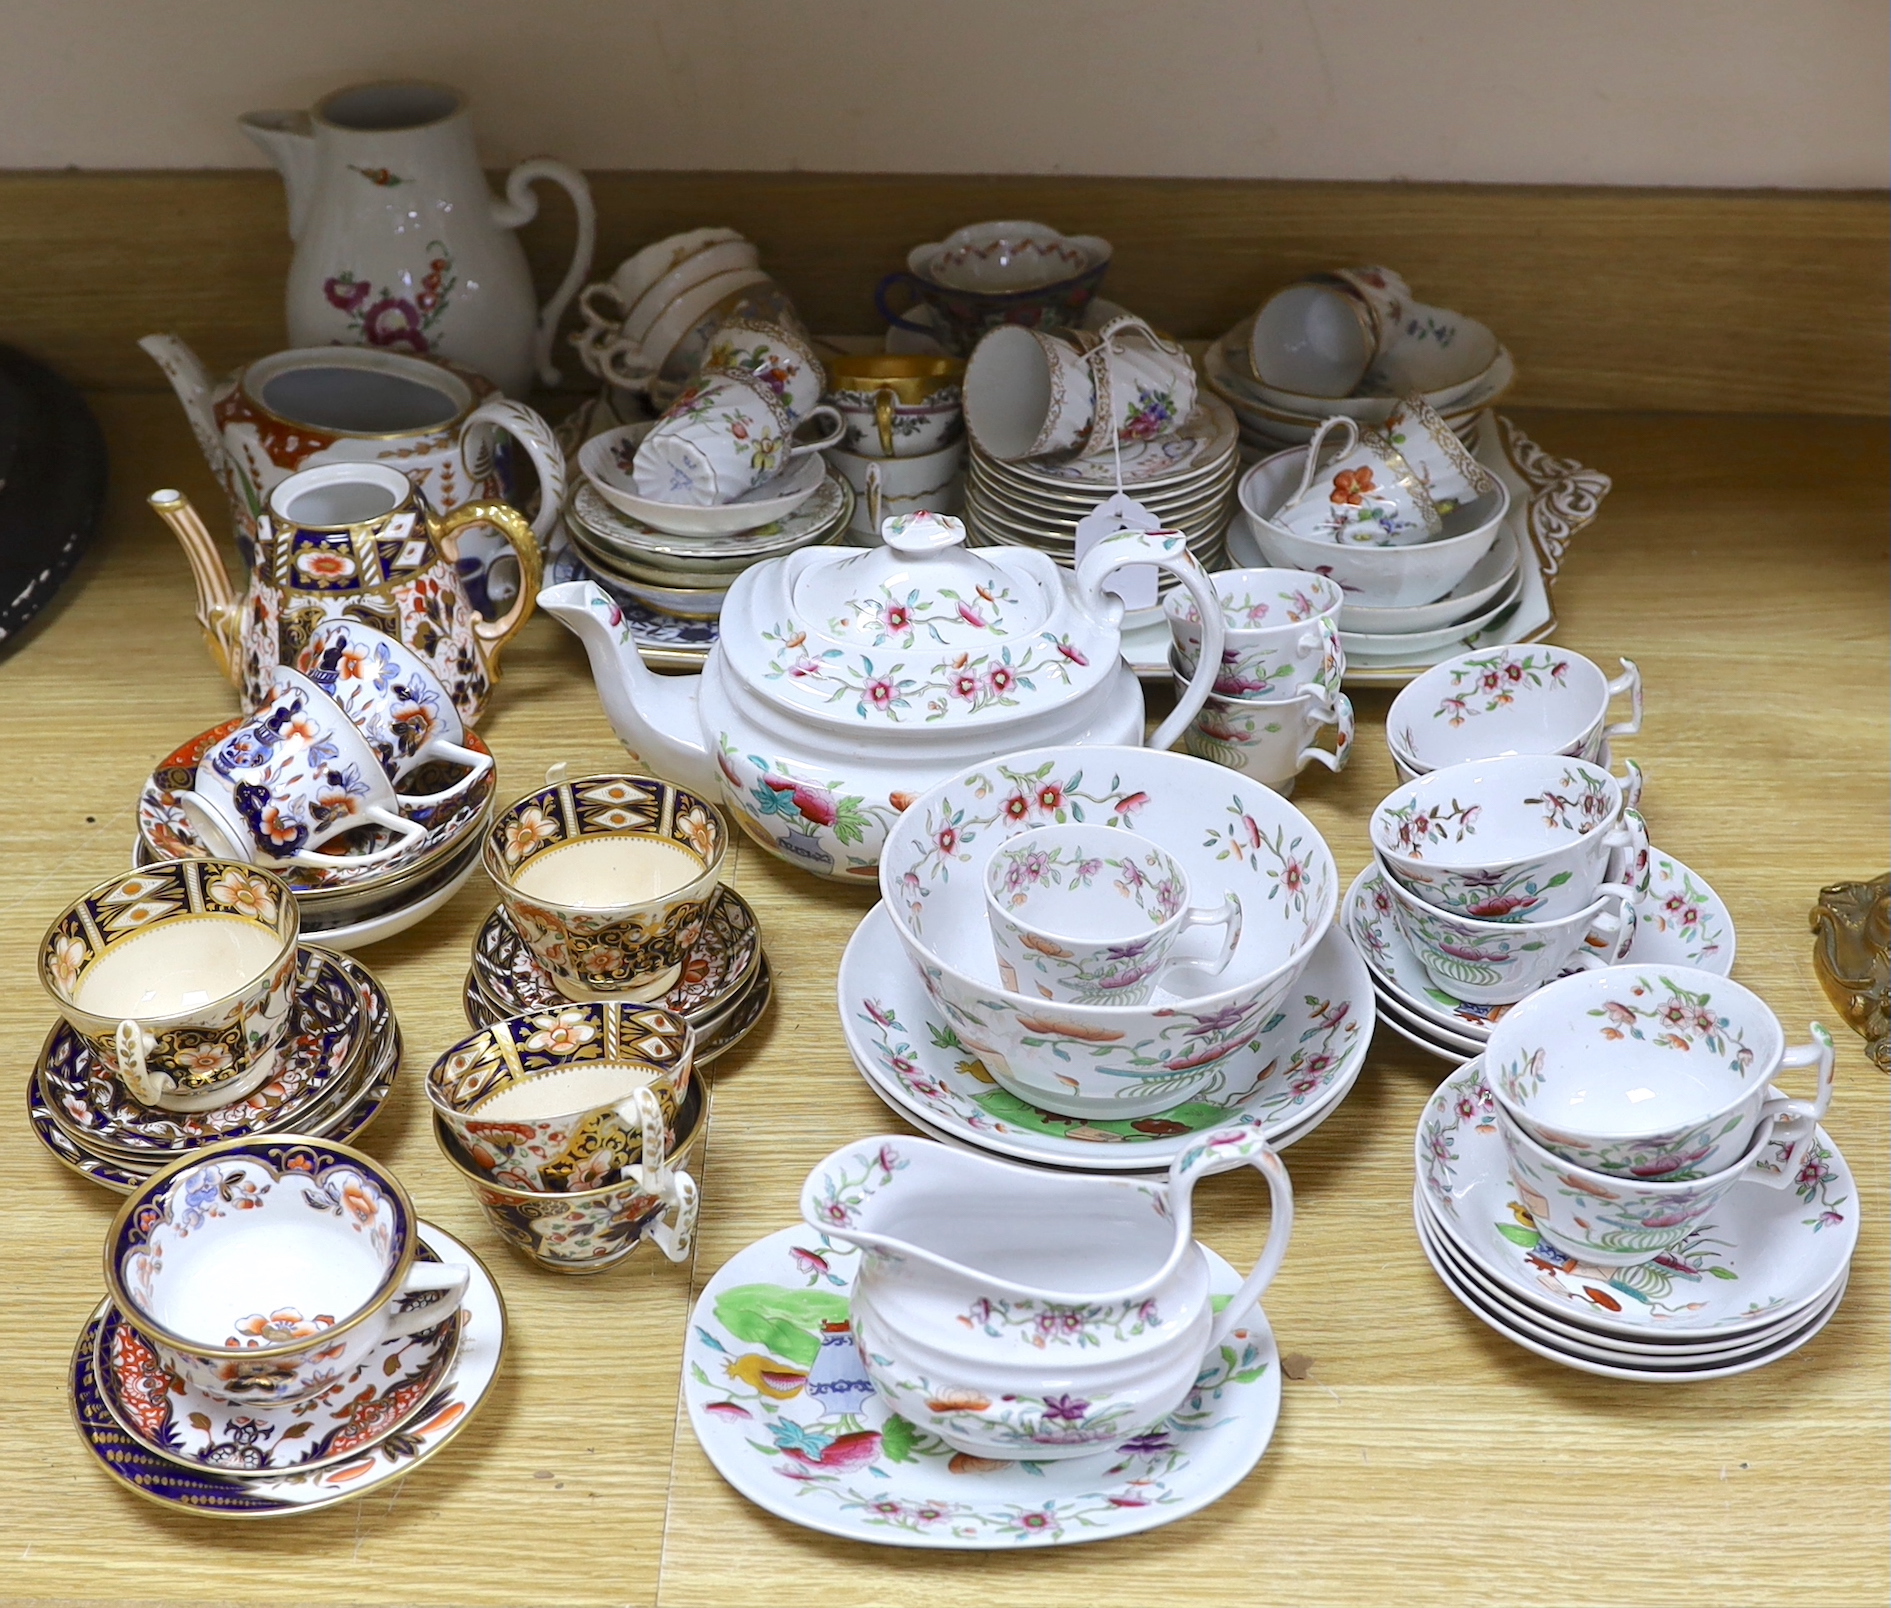 An early 19th century Newhall type tea set, pattern 95, mixed continental tea ware and Imari patterned tea wares